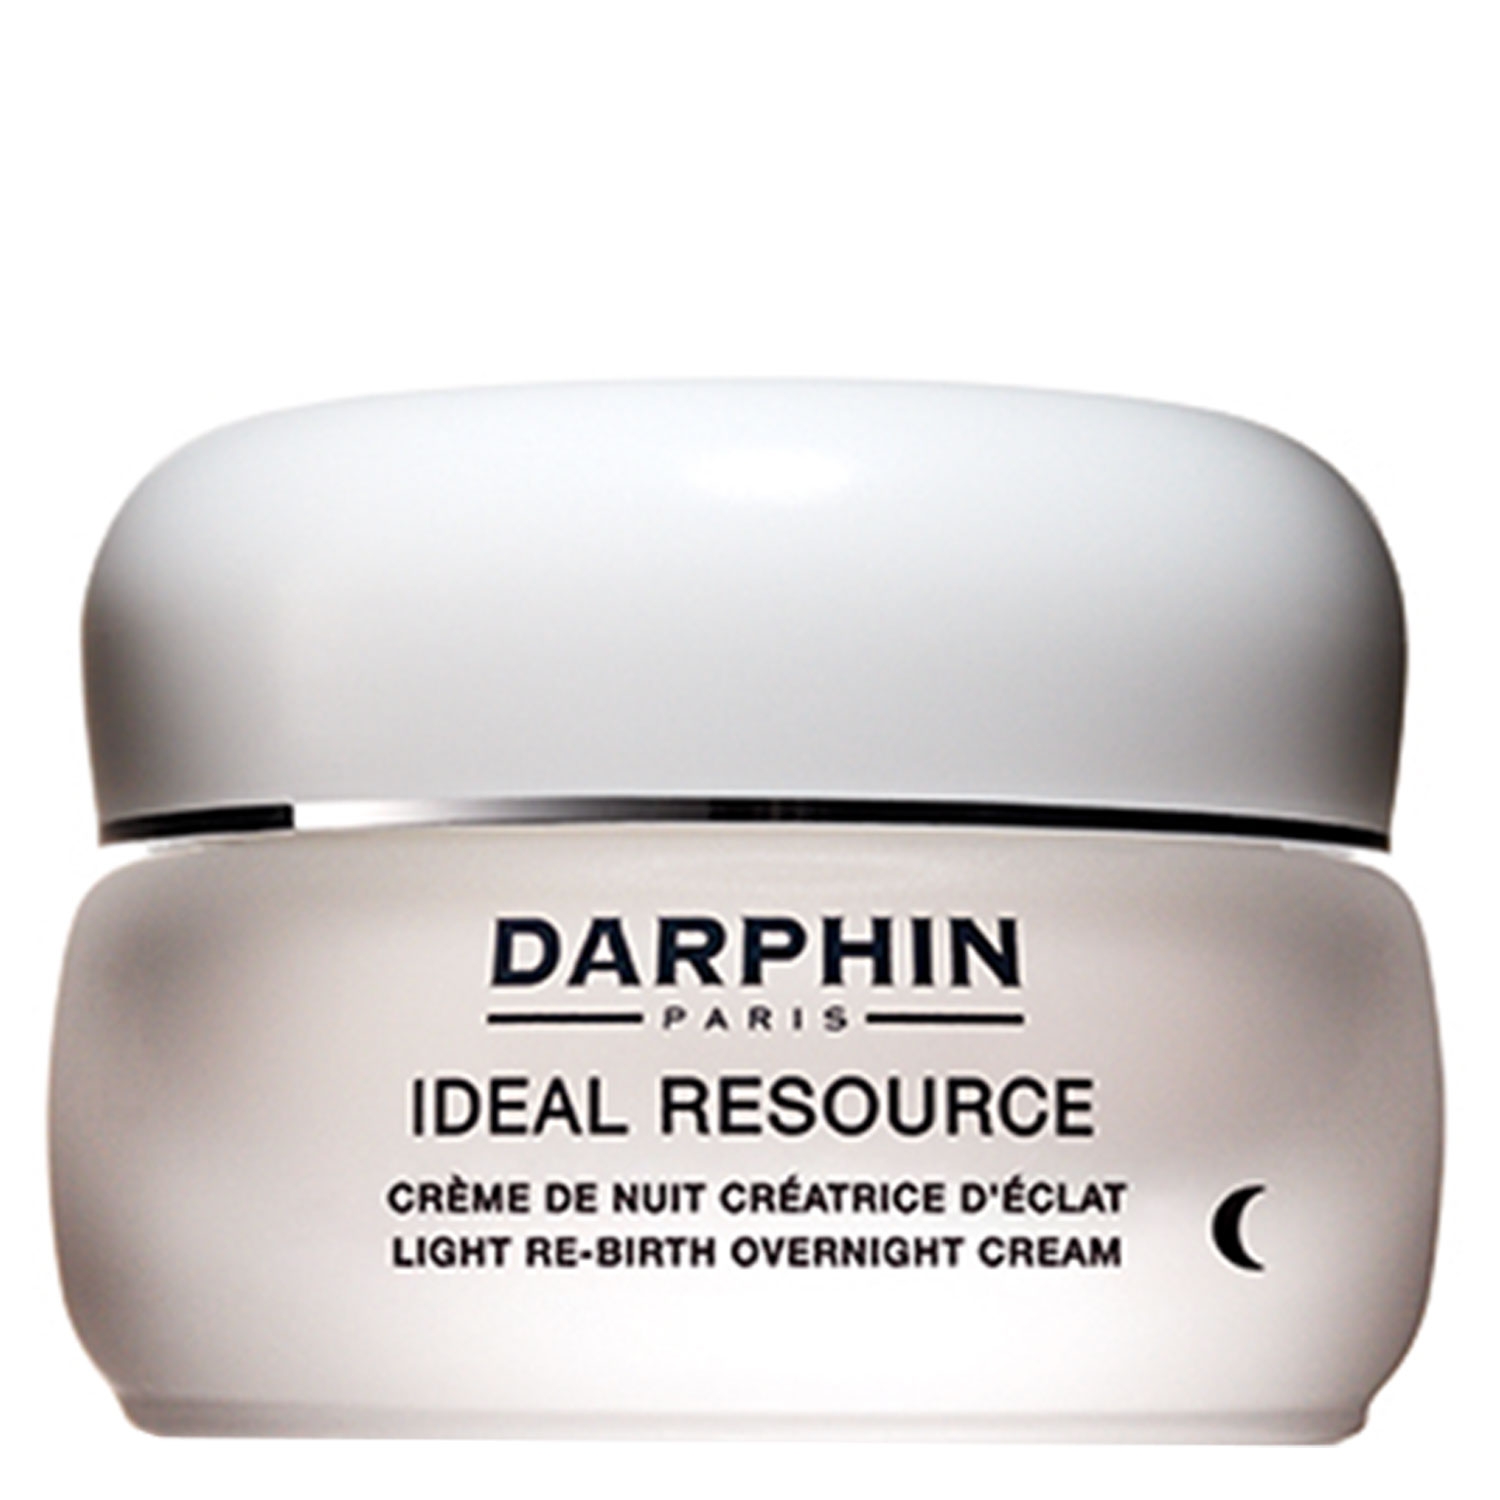 Product image from IDEAL RESOURCE - Light Re-Birth Overnight Cream